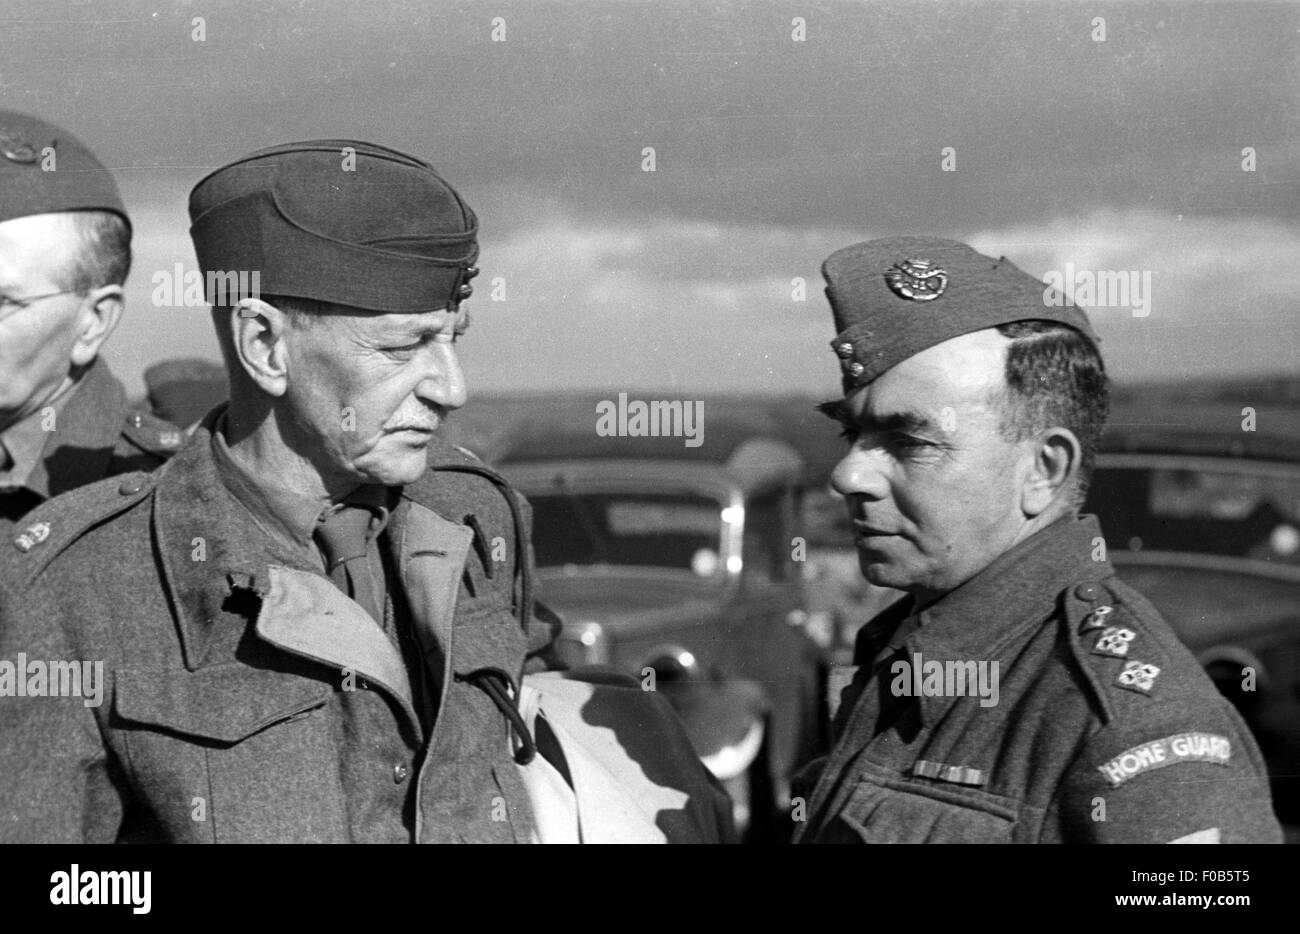 Two men of the Home Guard in uniform in discussion Stock Photo